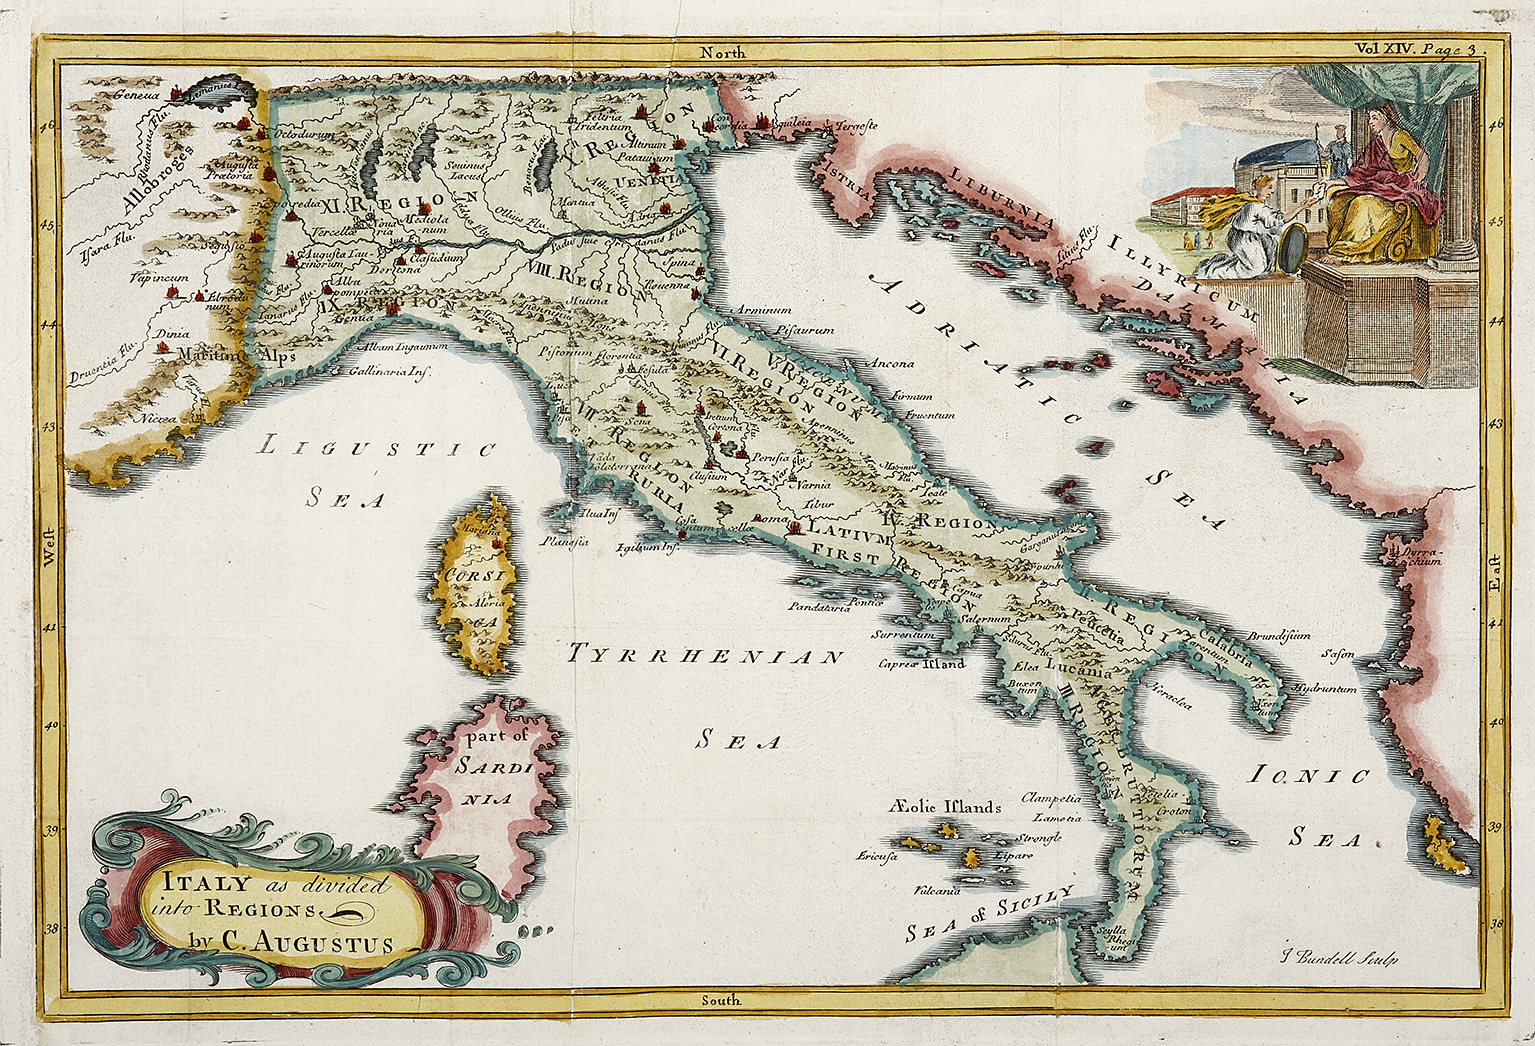 Italy as Divided into Regions by C. Augustus - Antique Map from 1747